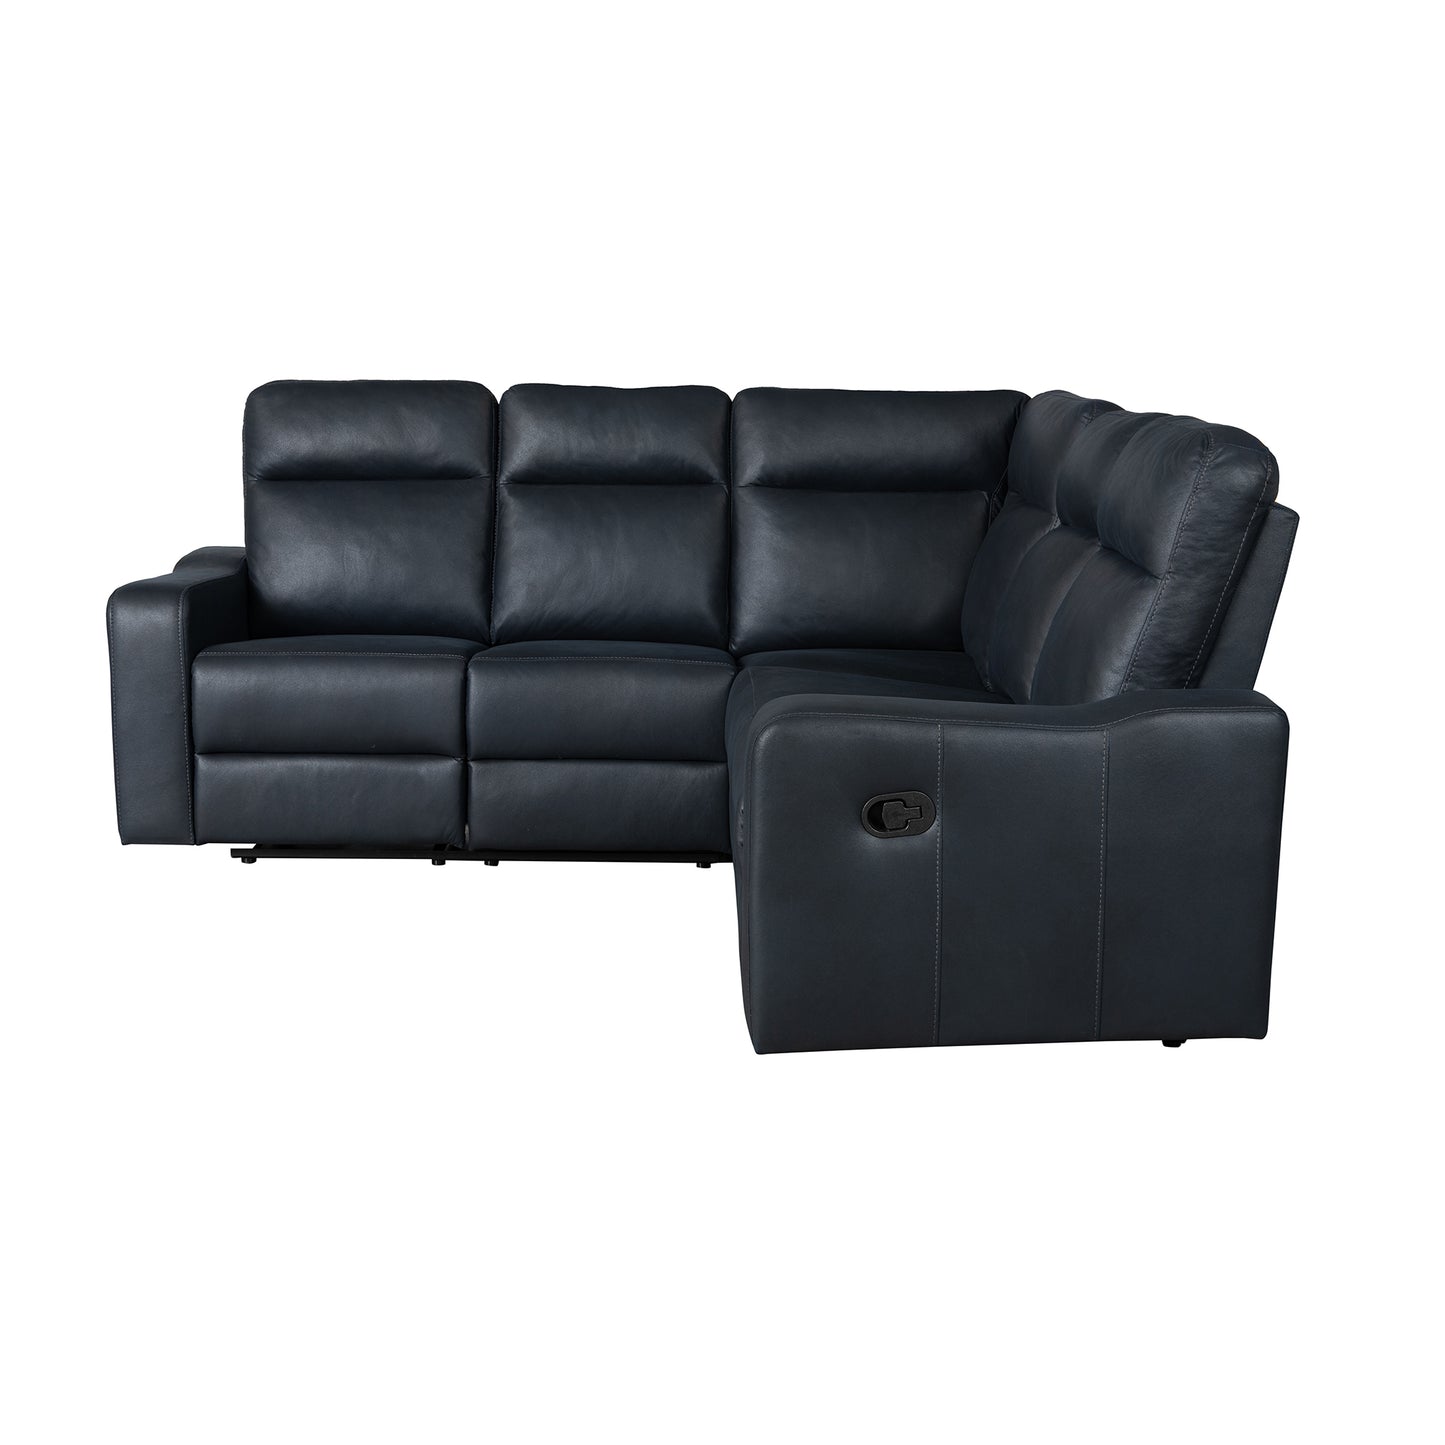 87.5" Manual Reclining Home Theater Seating Recliner Chair Sofa with Flipped Middle Backrest, 2 Cup Holders for Living Room, Bedroom, Home Theater, Black Blue